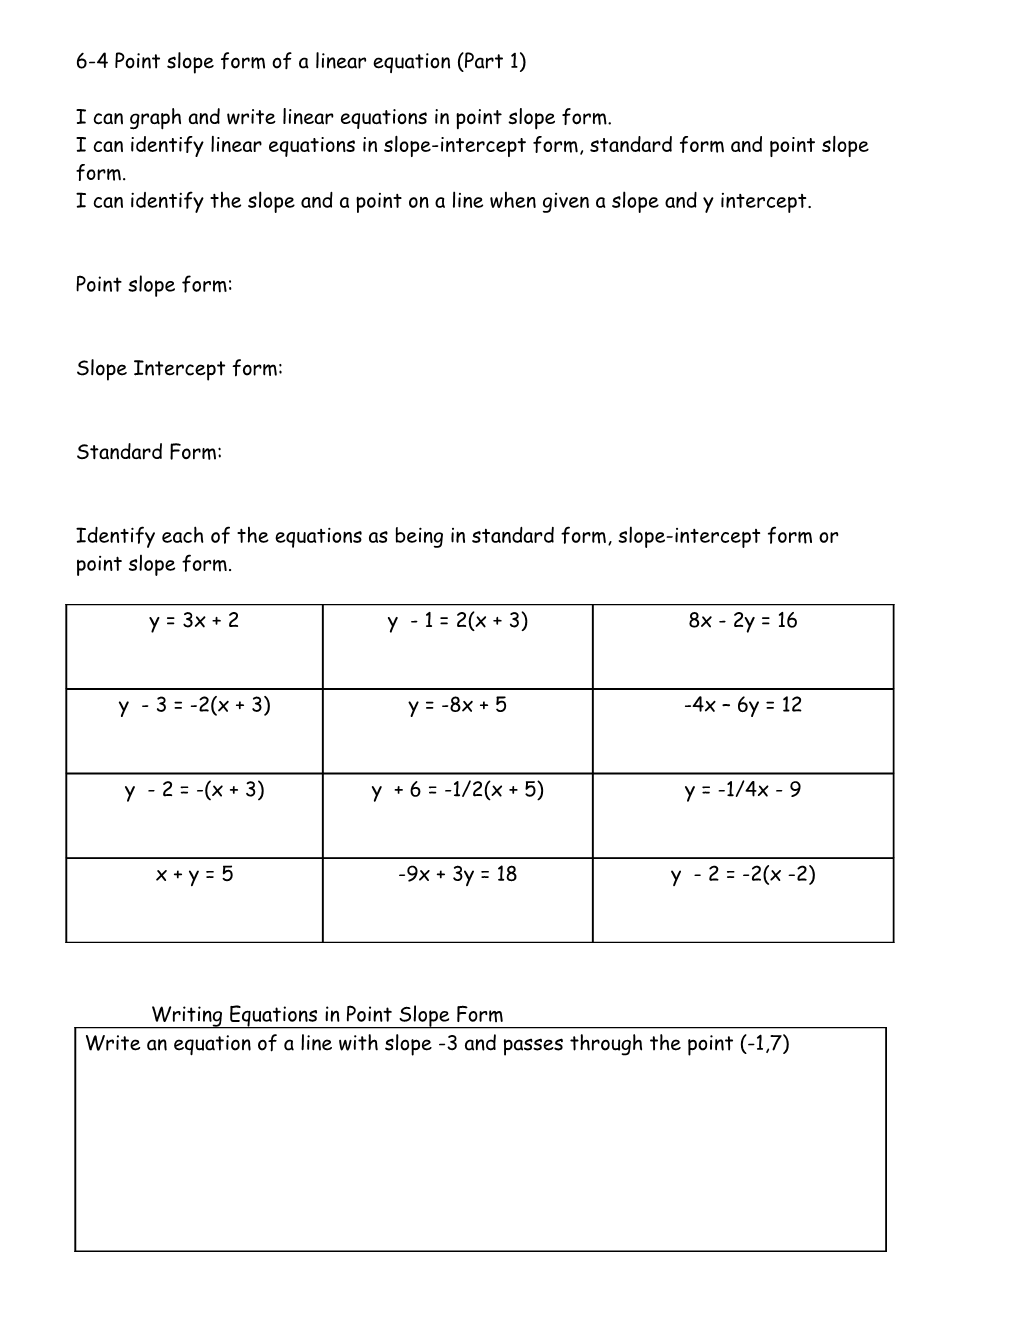 6-4 Point Slope Form of a Linear Equation